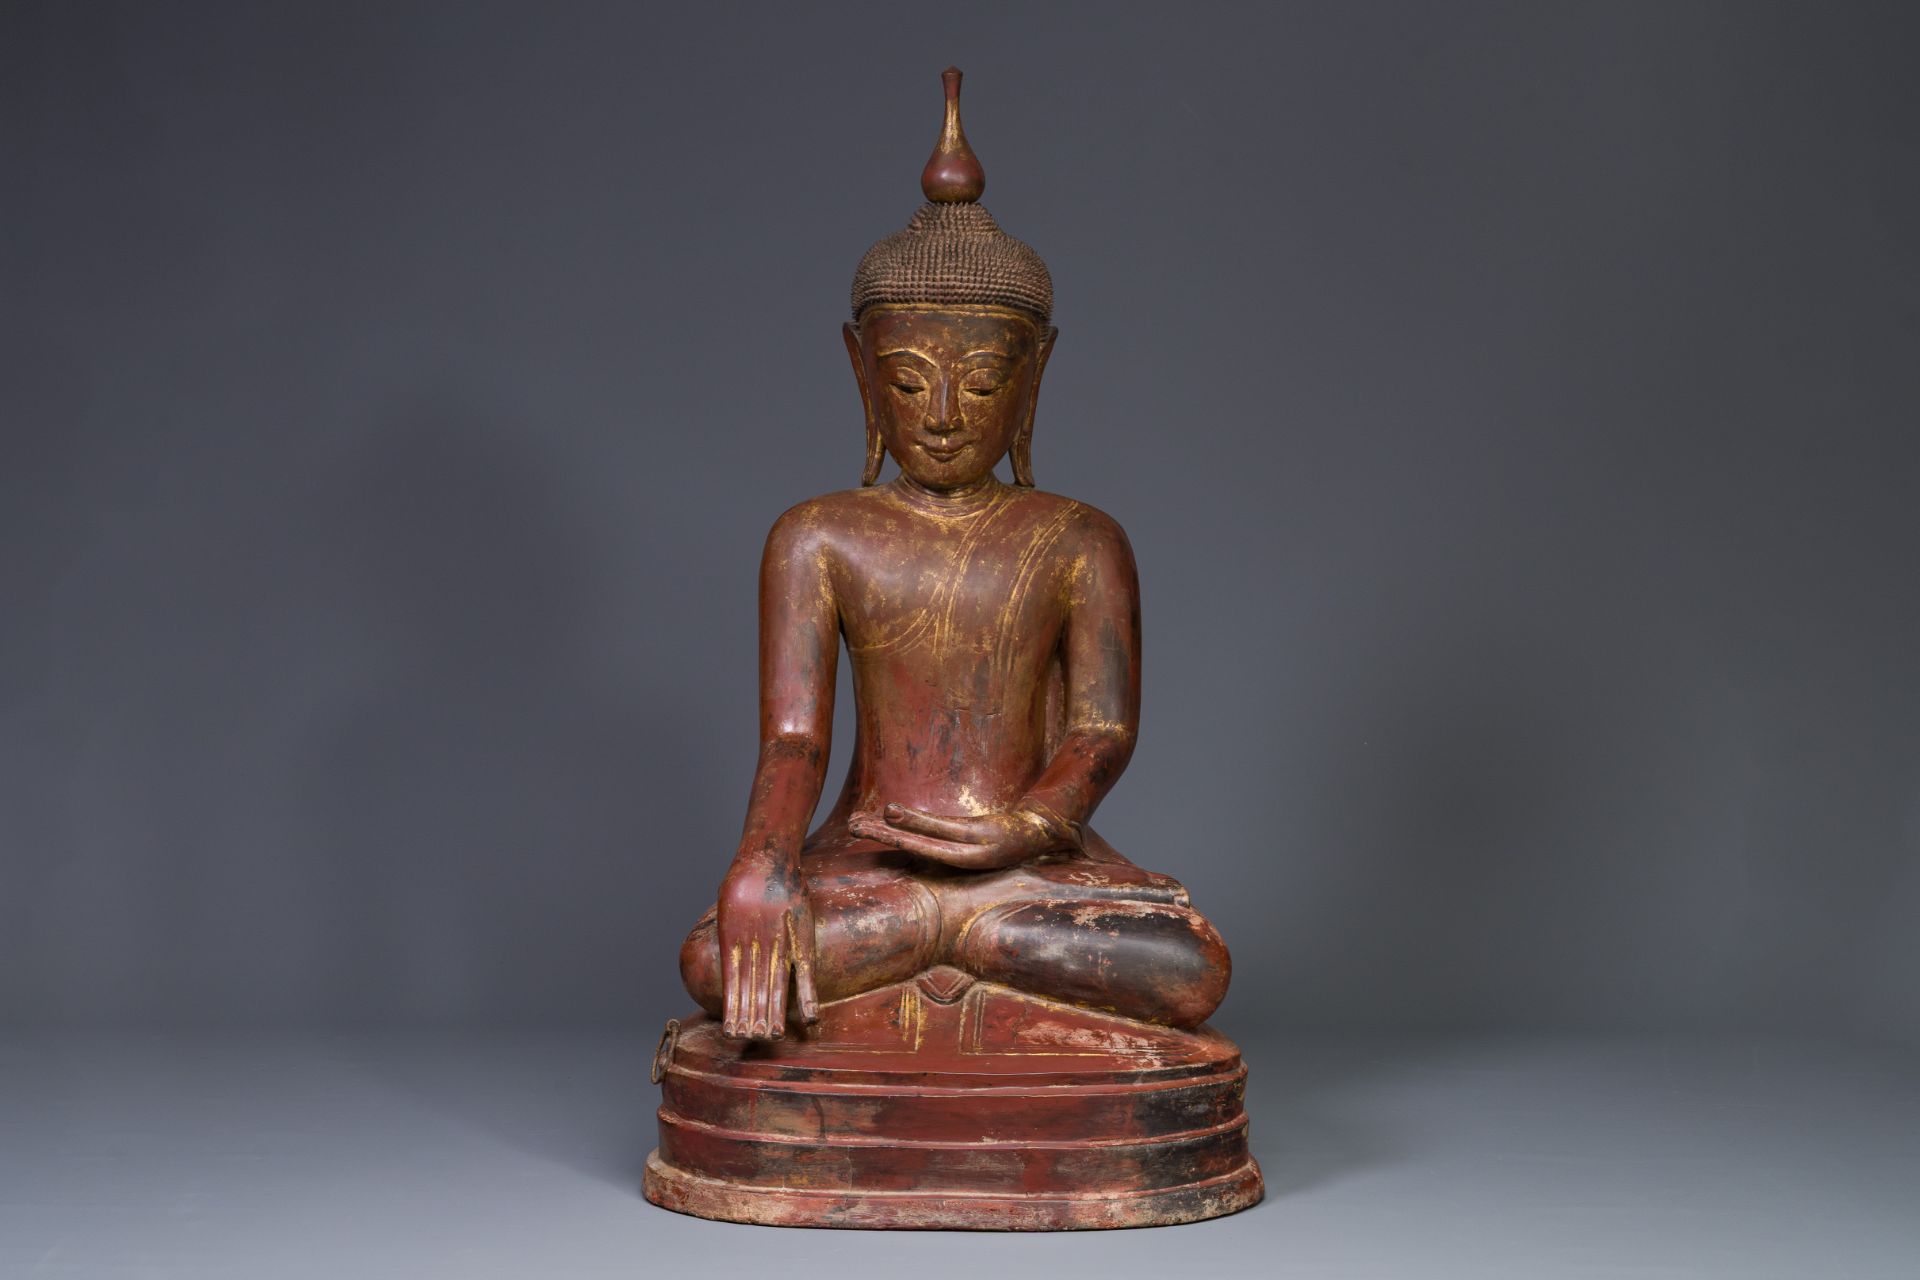 A large Burmese gilded lacquer Buddha in bhumisparsha mudra, 19/20th C. - Image 3 of 18